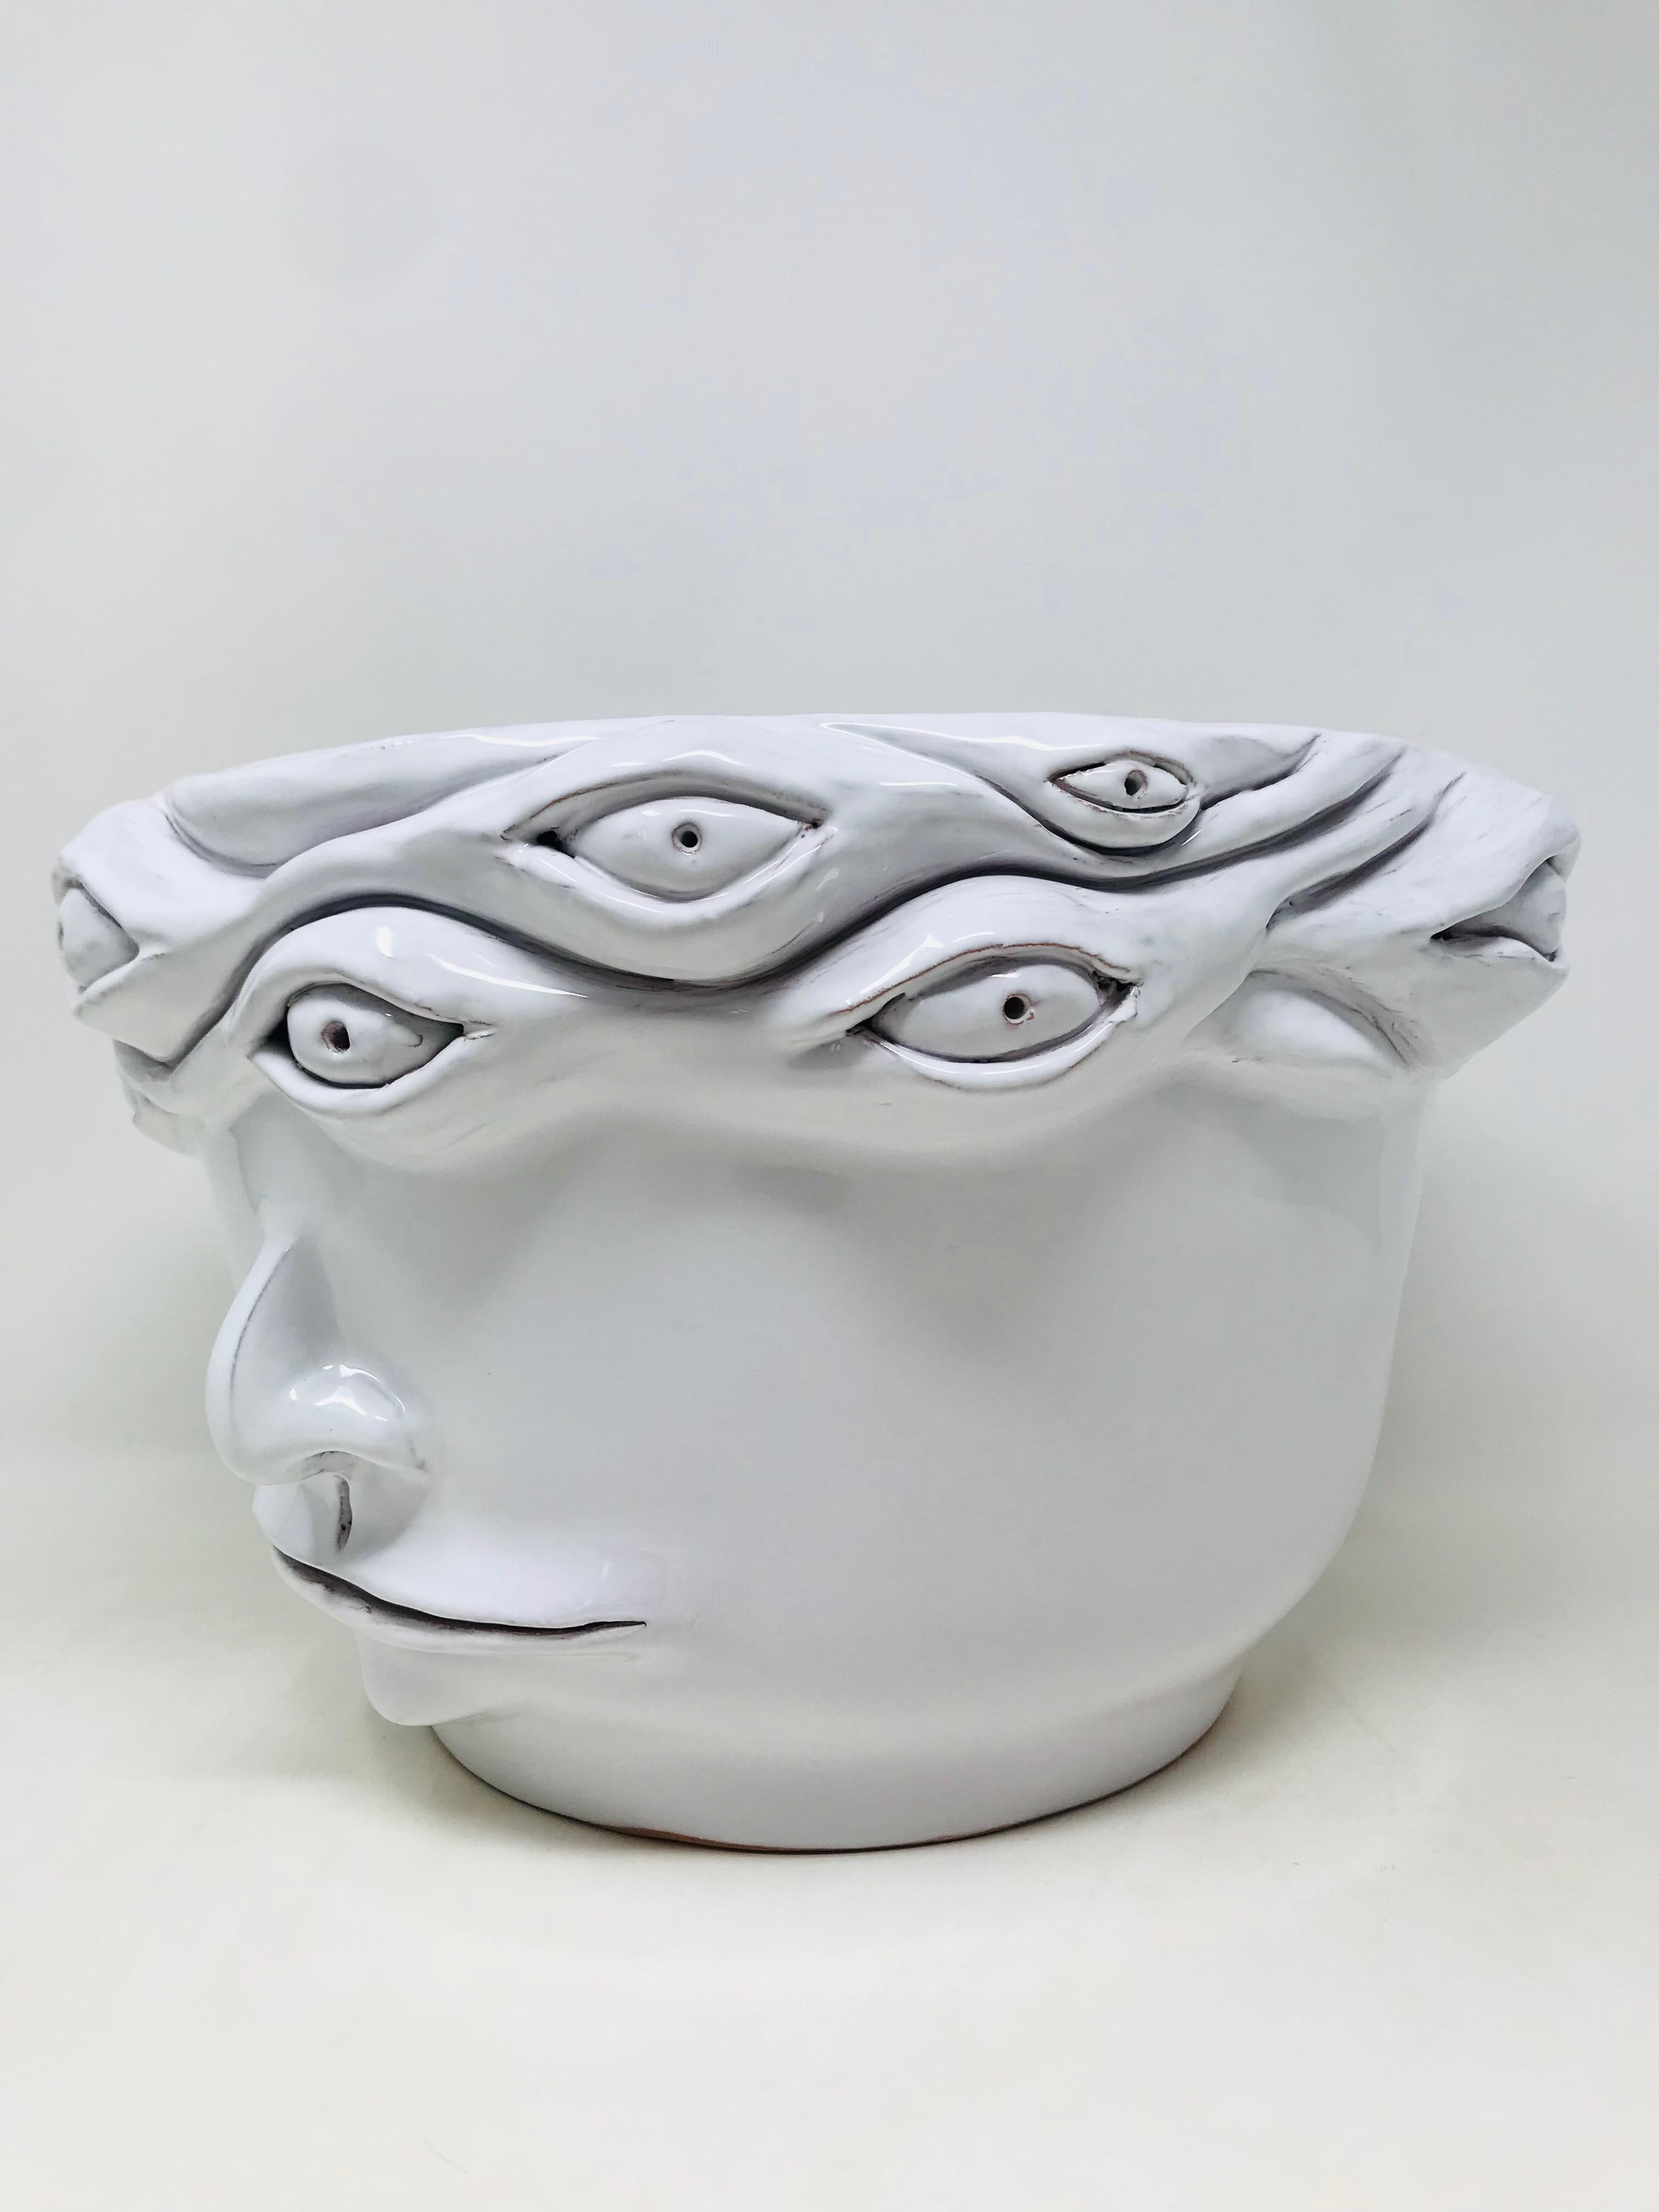 Freaklab Vase Made Entirely by Hand in Ceramic, White Color For Sale 1